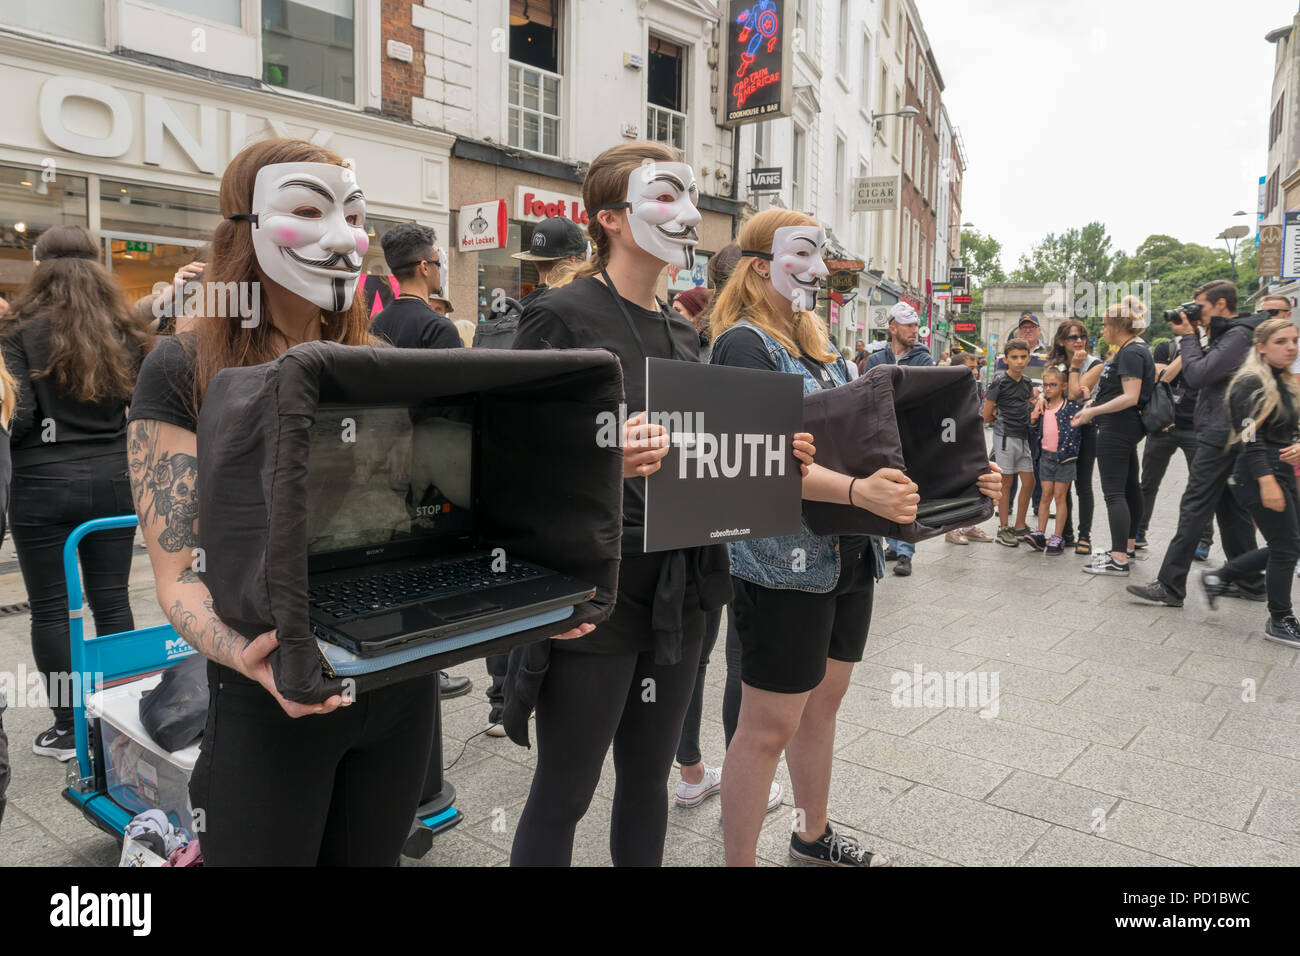 Dublin, Ireland. 5th August, 2018. Anonymous for the voiceless cube of  Truth in Dublin Grafton Street Credit: Fabrice Jolivet/Alamy Live News  Stock Photo - Alamy